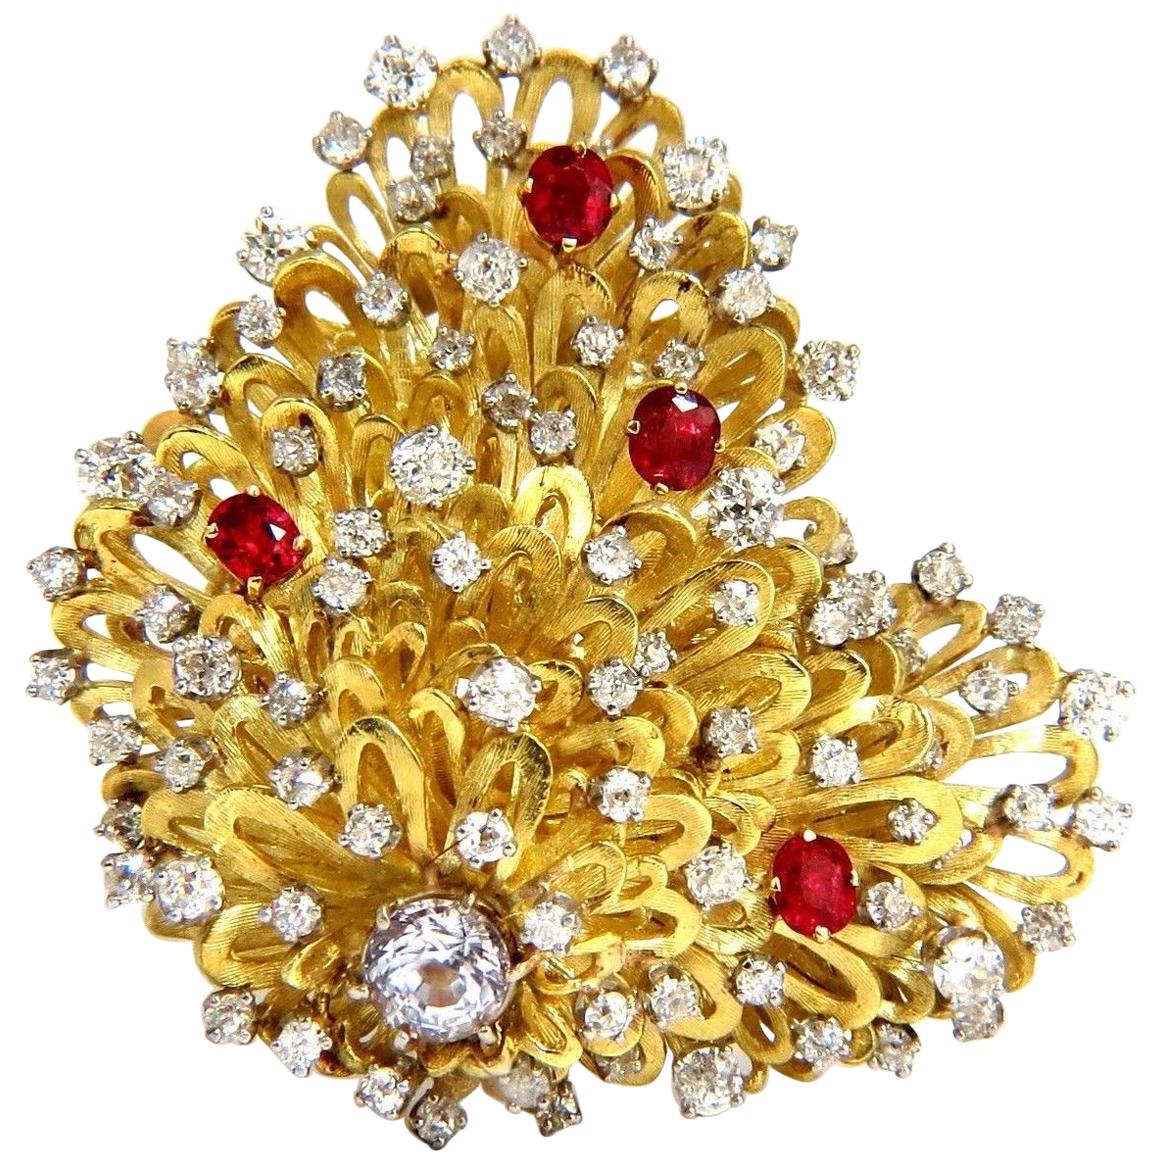 Erwin Pearl 8.00 Carat Natural Diamonds and Red Spinel Brooch Pin 18 Karat For Sale